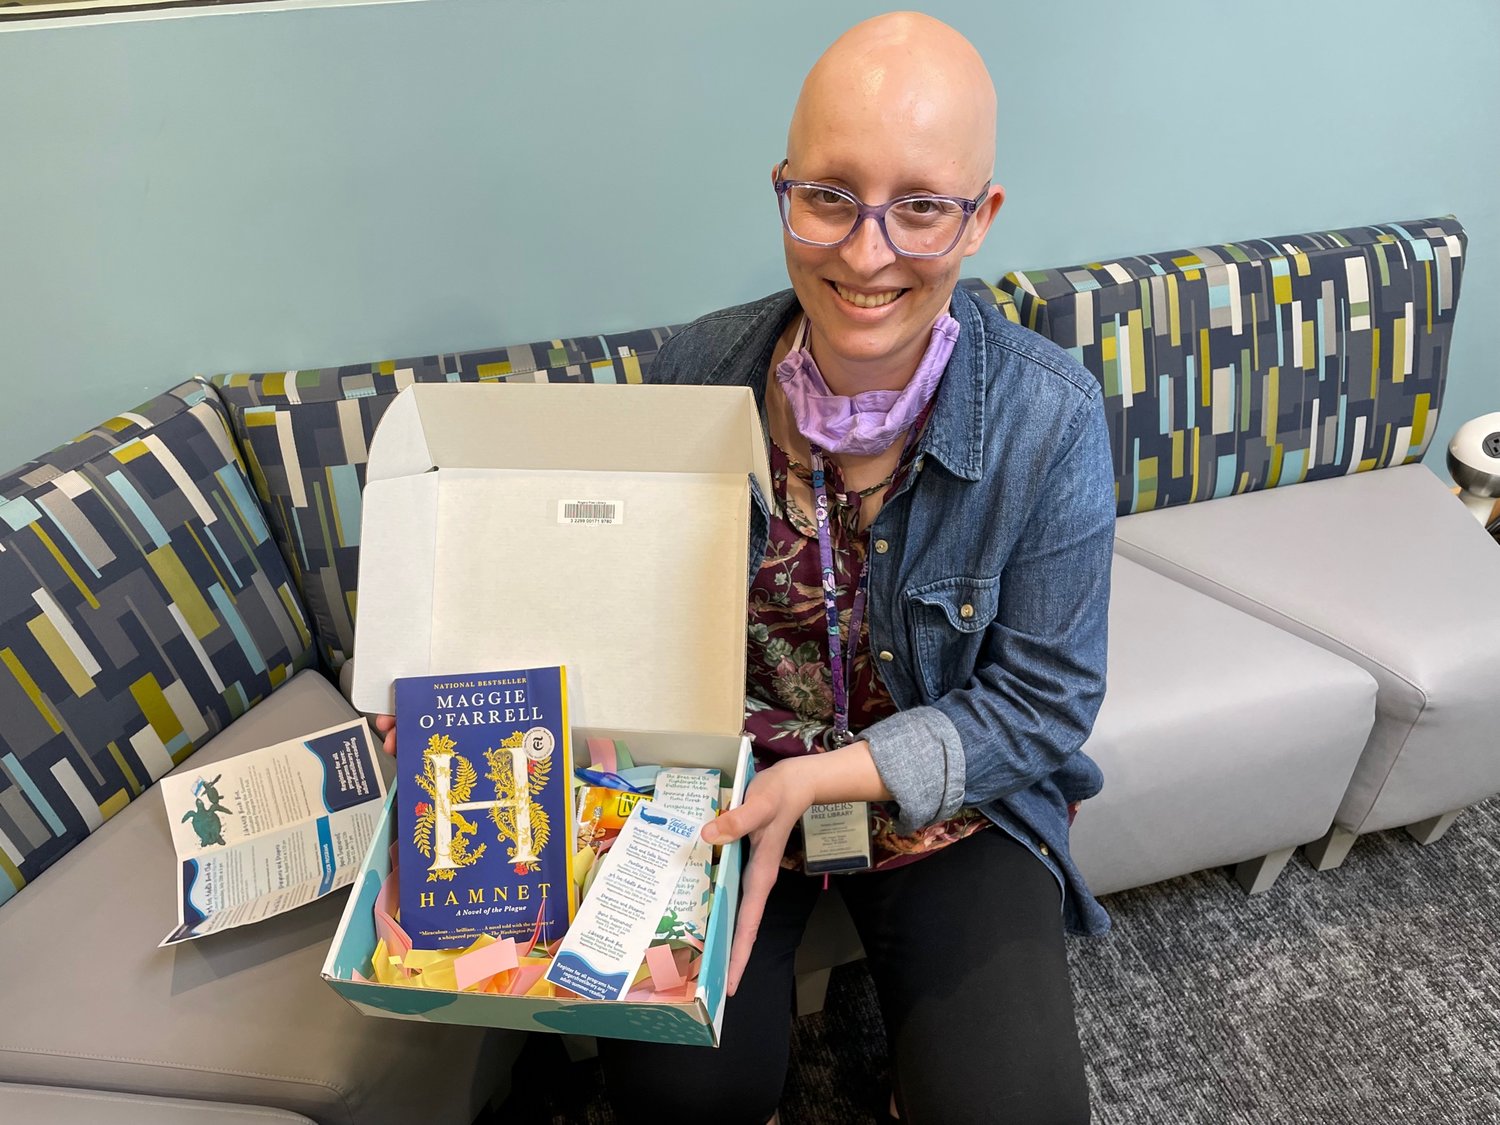 Information and technology librarian Kristin Amaral shows off a prototype of the library’s new subscription box, which will contain a snack and other treats along with a book, hand-selected for by a librarian, based on a form guests can fill out online.